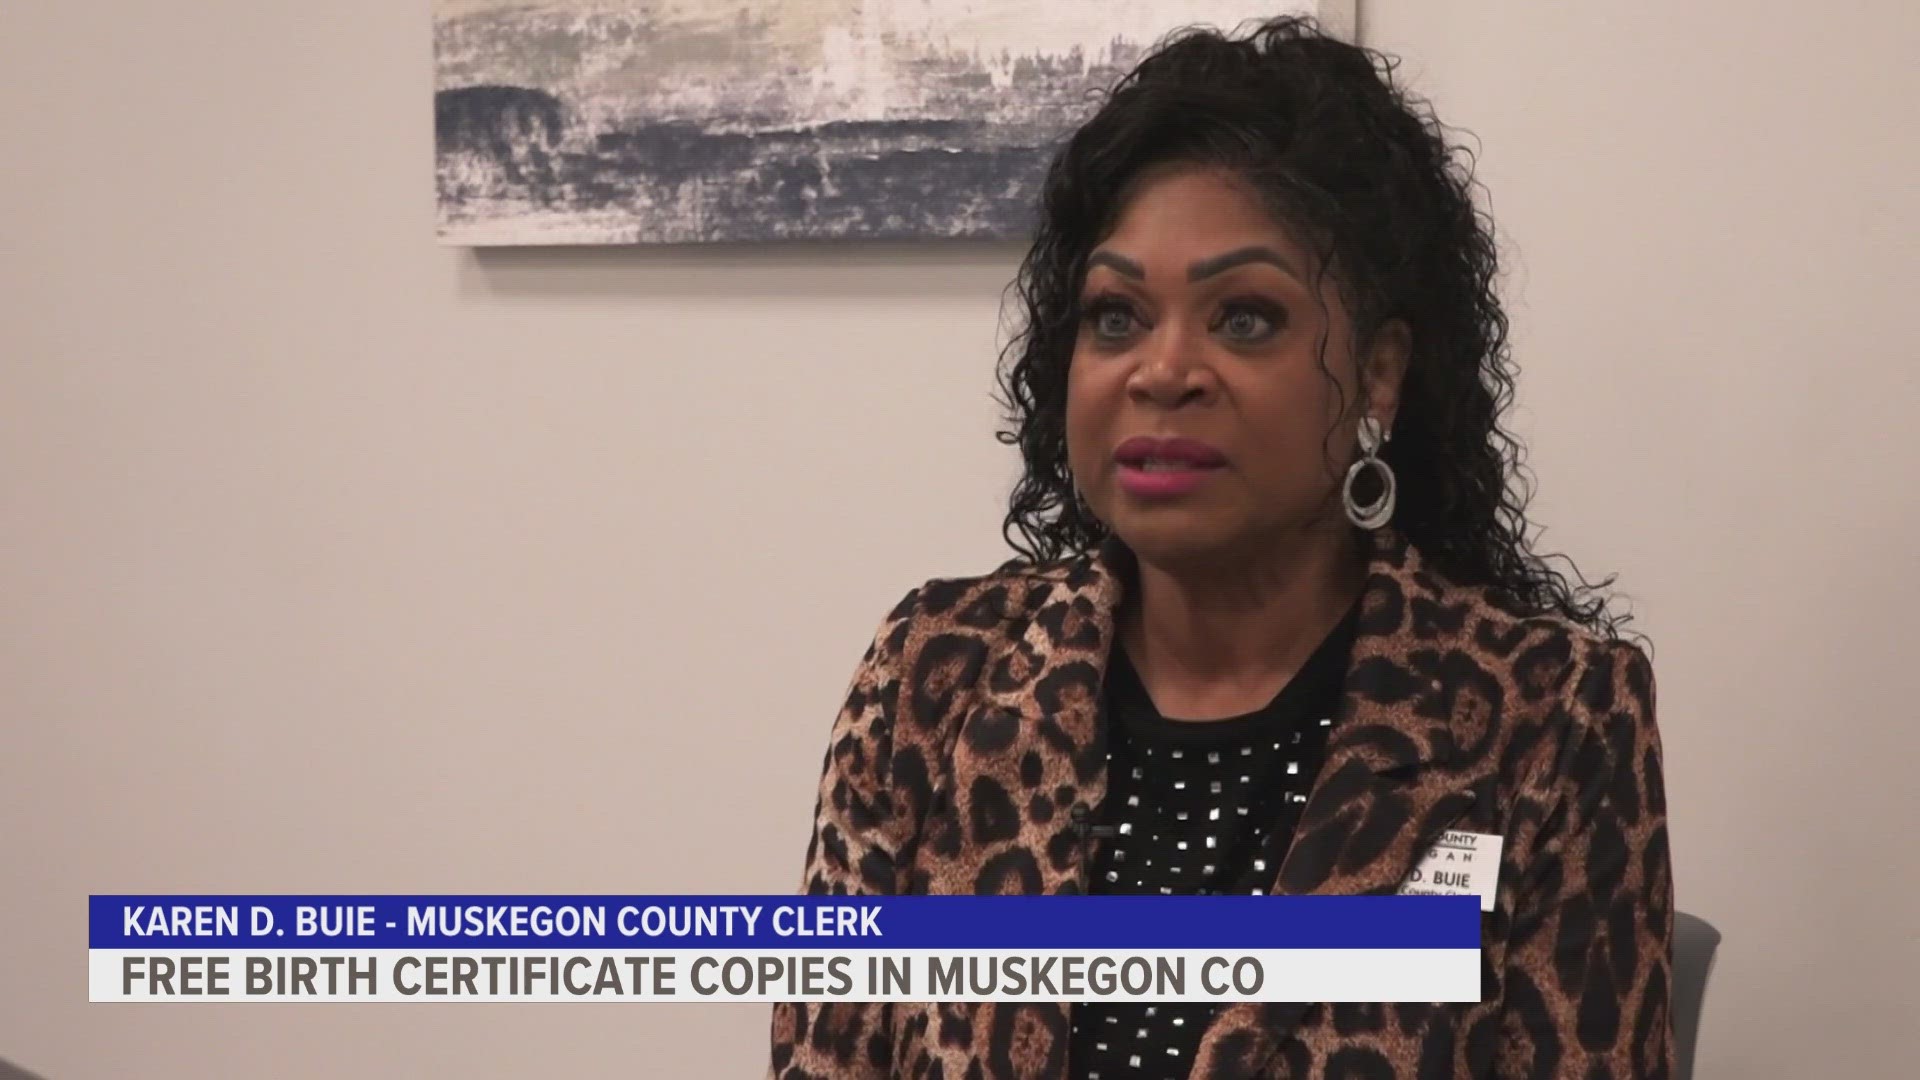 The  Muskegon county clerk is partnering with one of the county's most longstanding nonprofits to make sure everyone has access to vital records.